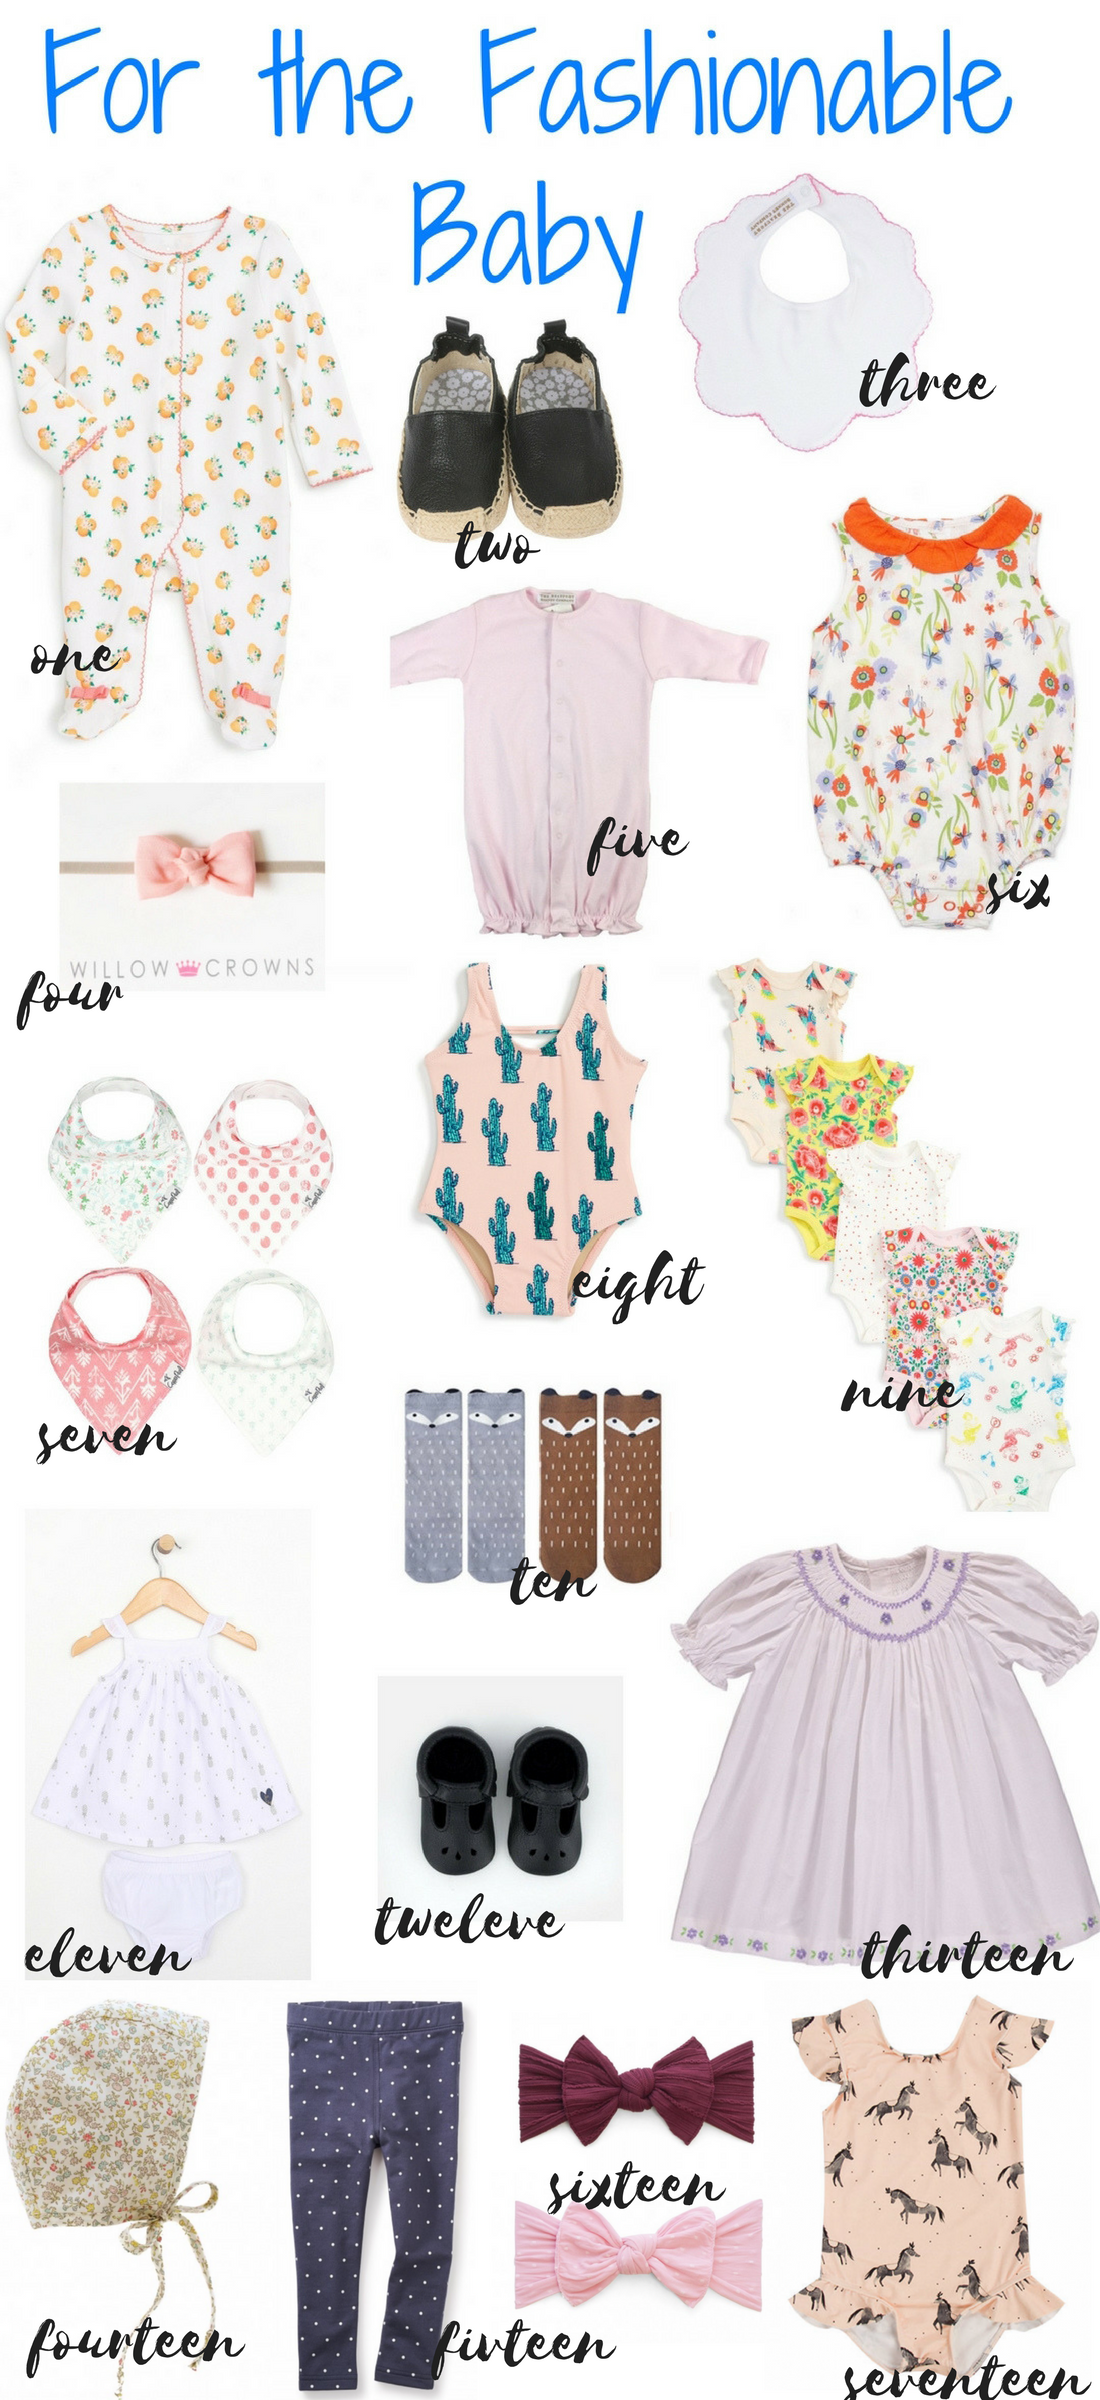 Cute baby girl outfits and accessories